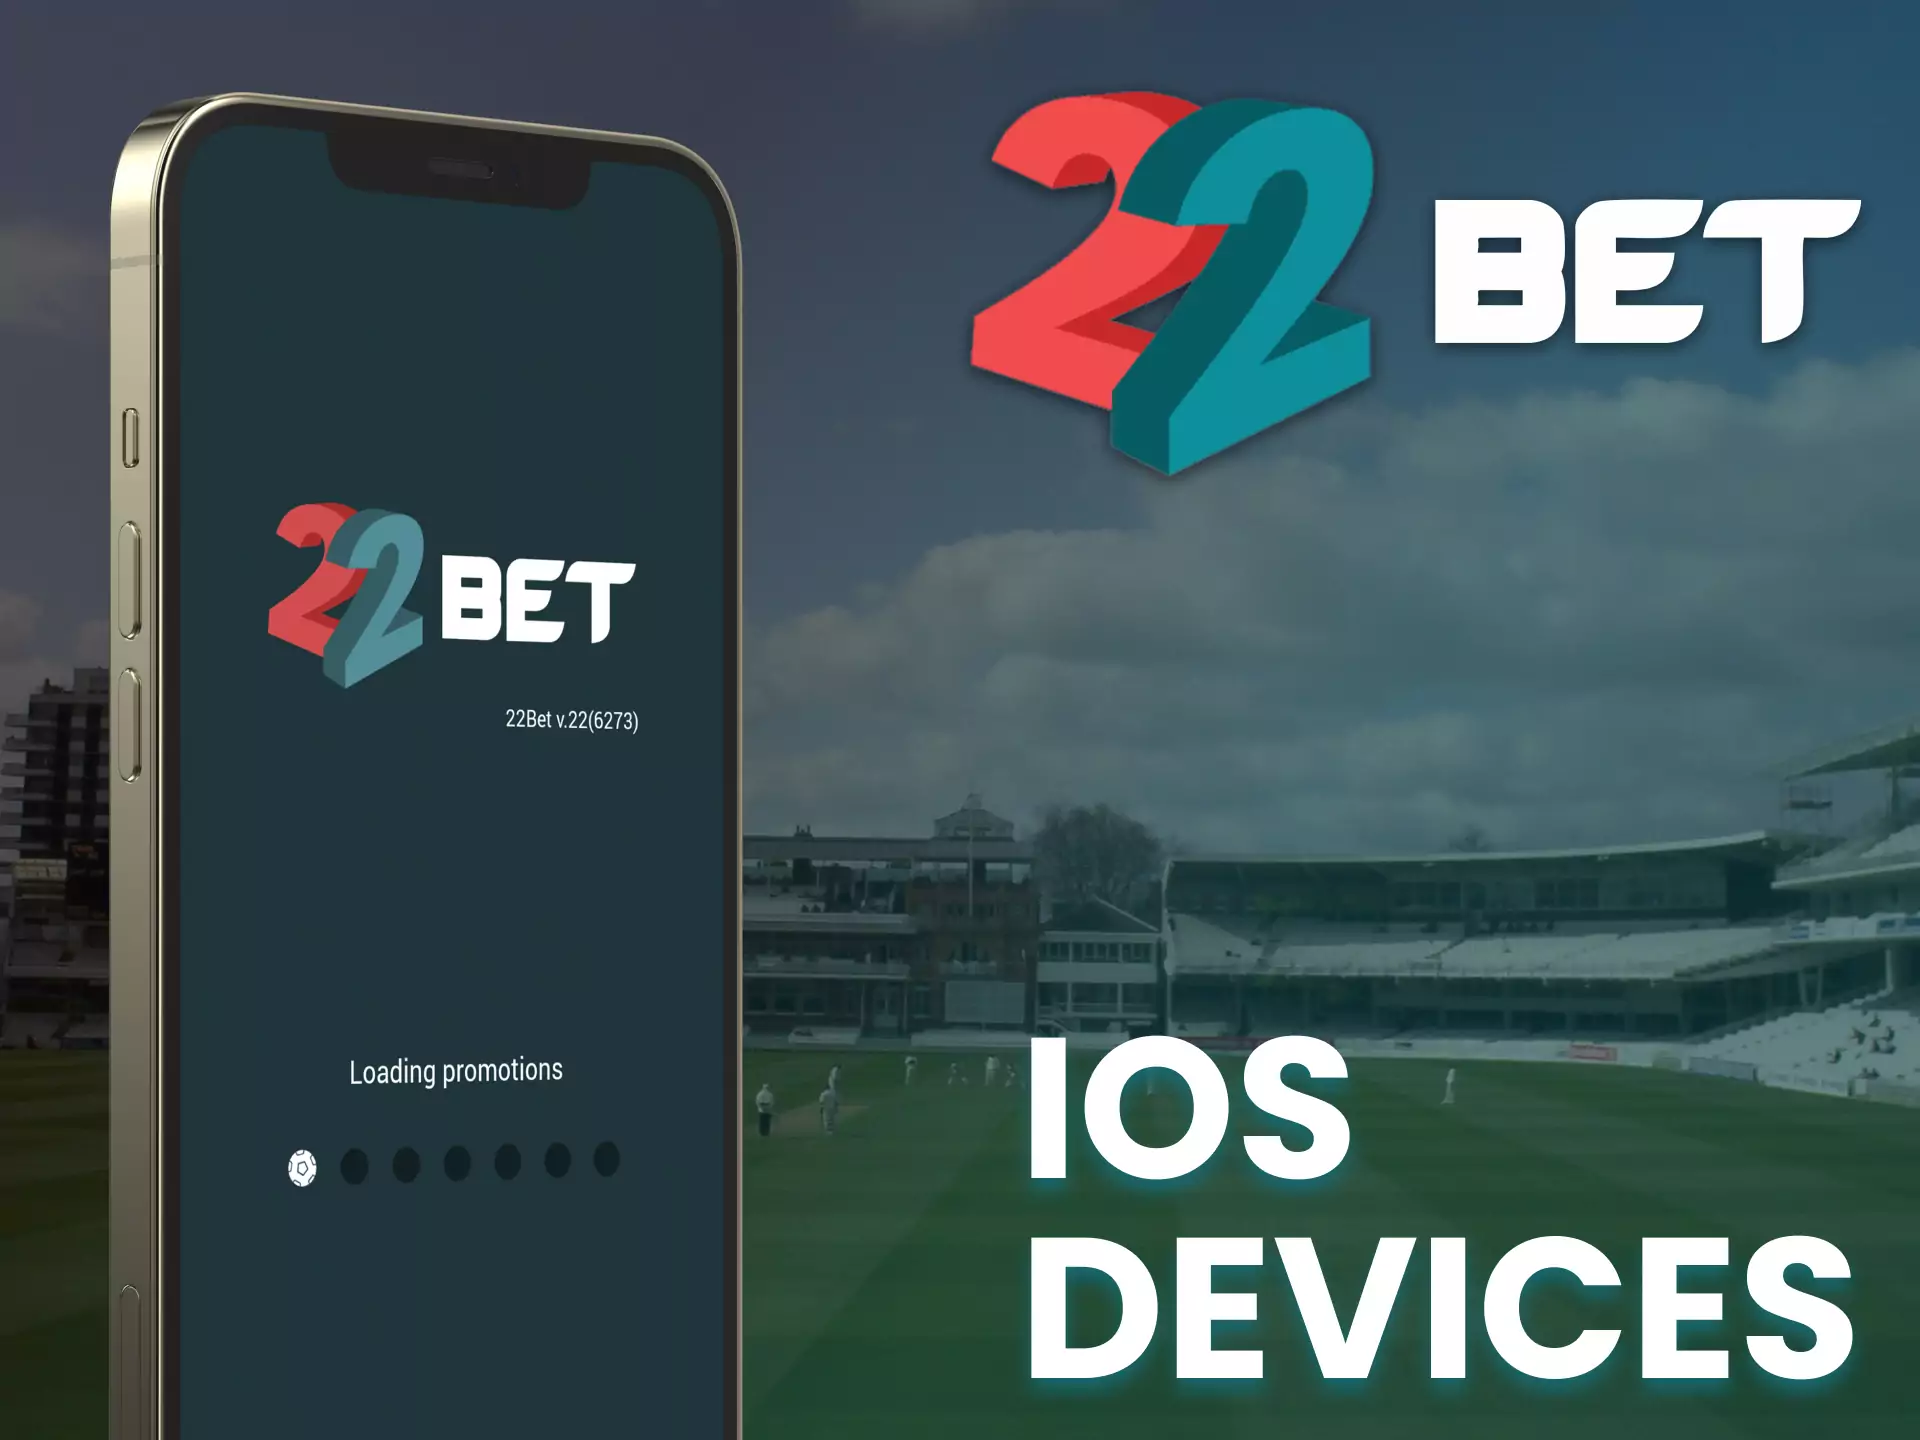 22bet app is supported on various iOS devices.